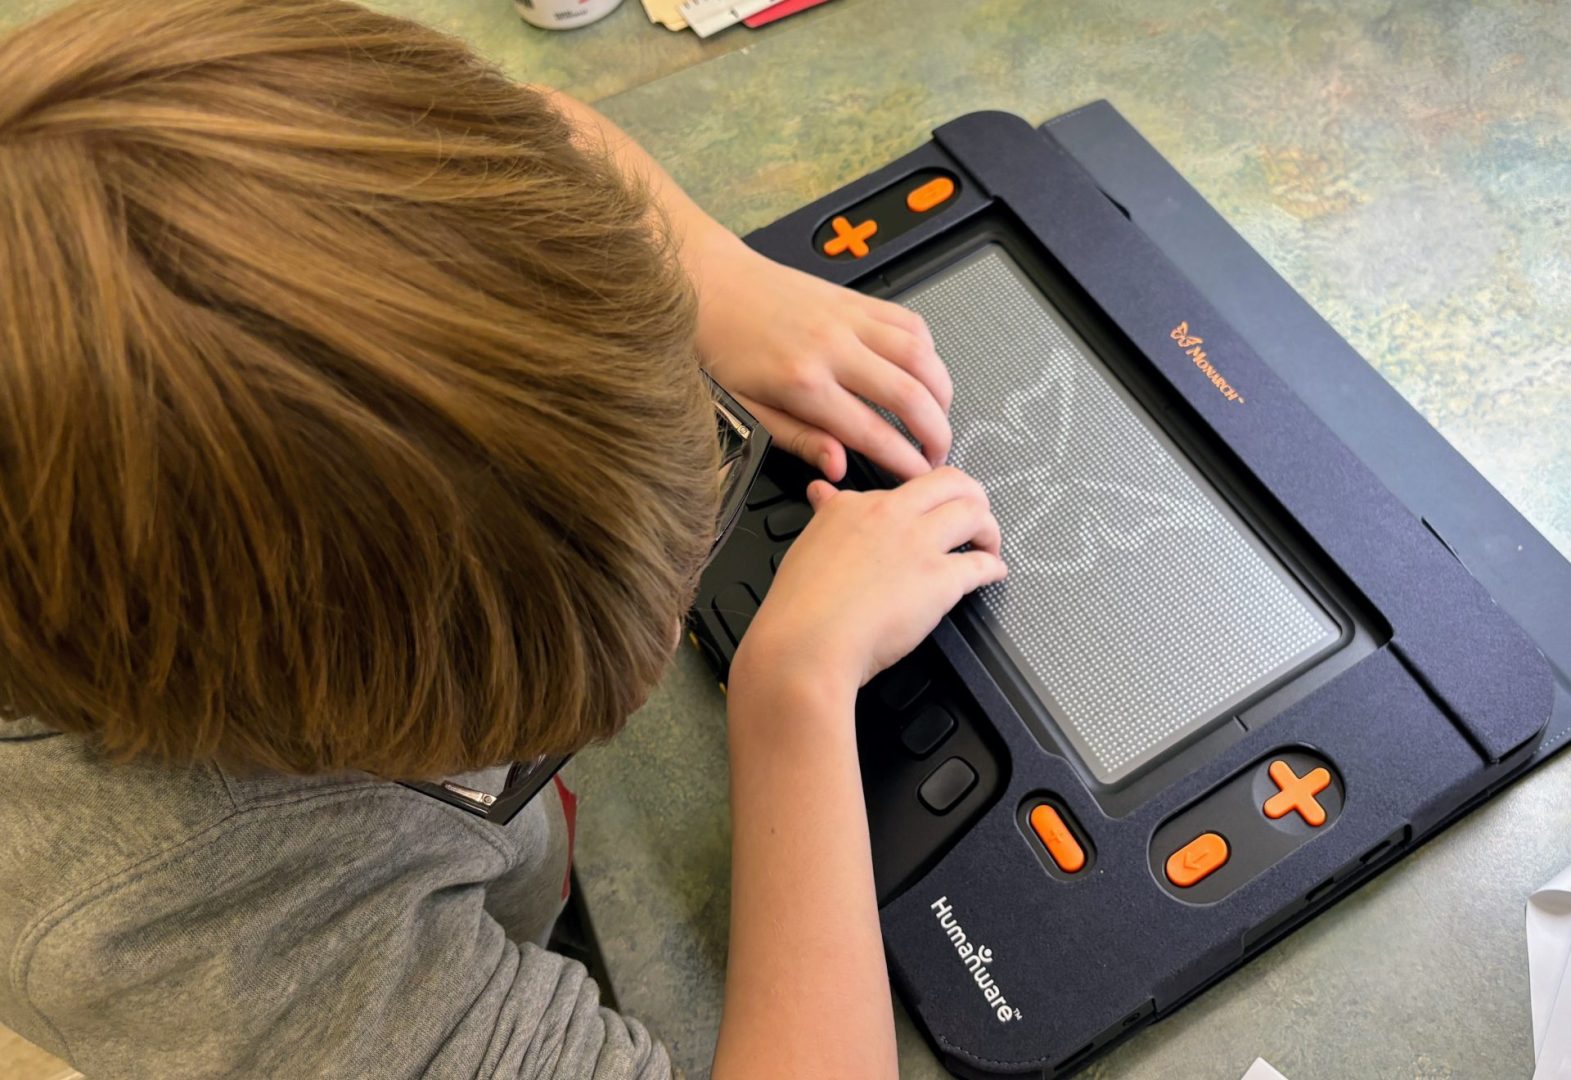 A young boy uses both of his hands to feel a tactile graphic of the butterfly featured in the Monarch logo on the Monarch’s 10 line by 32 cell refreshable braille display.